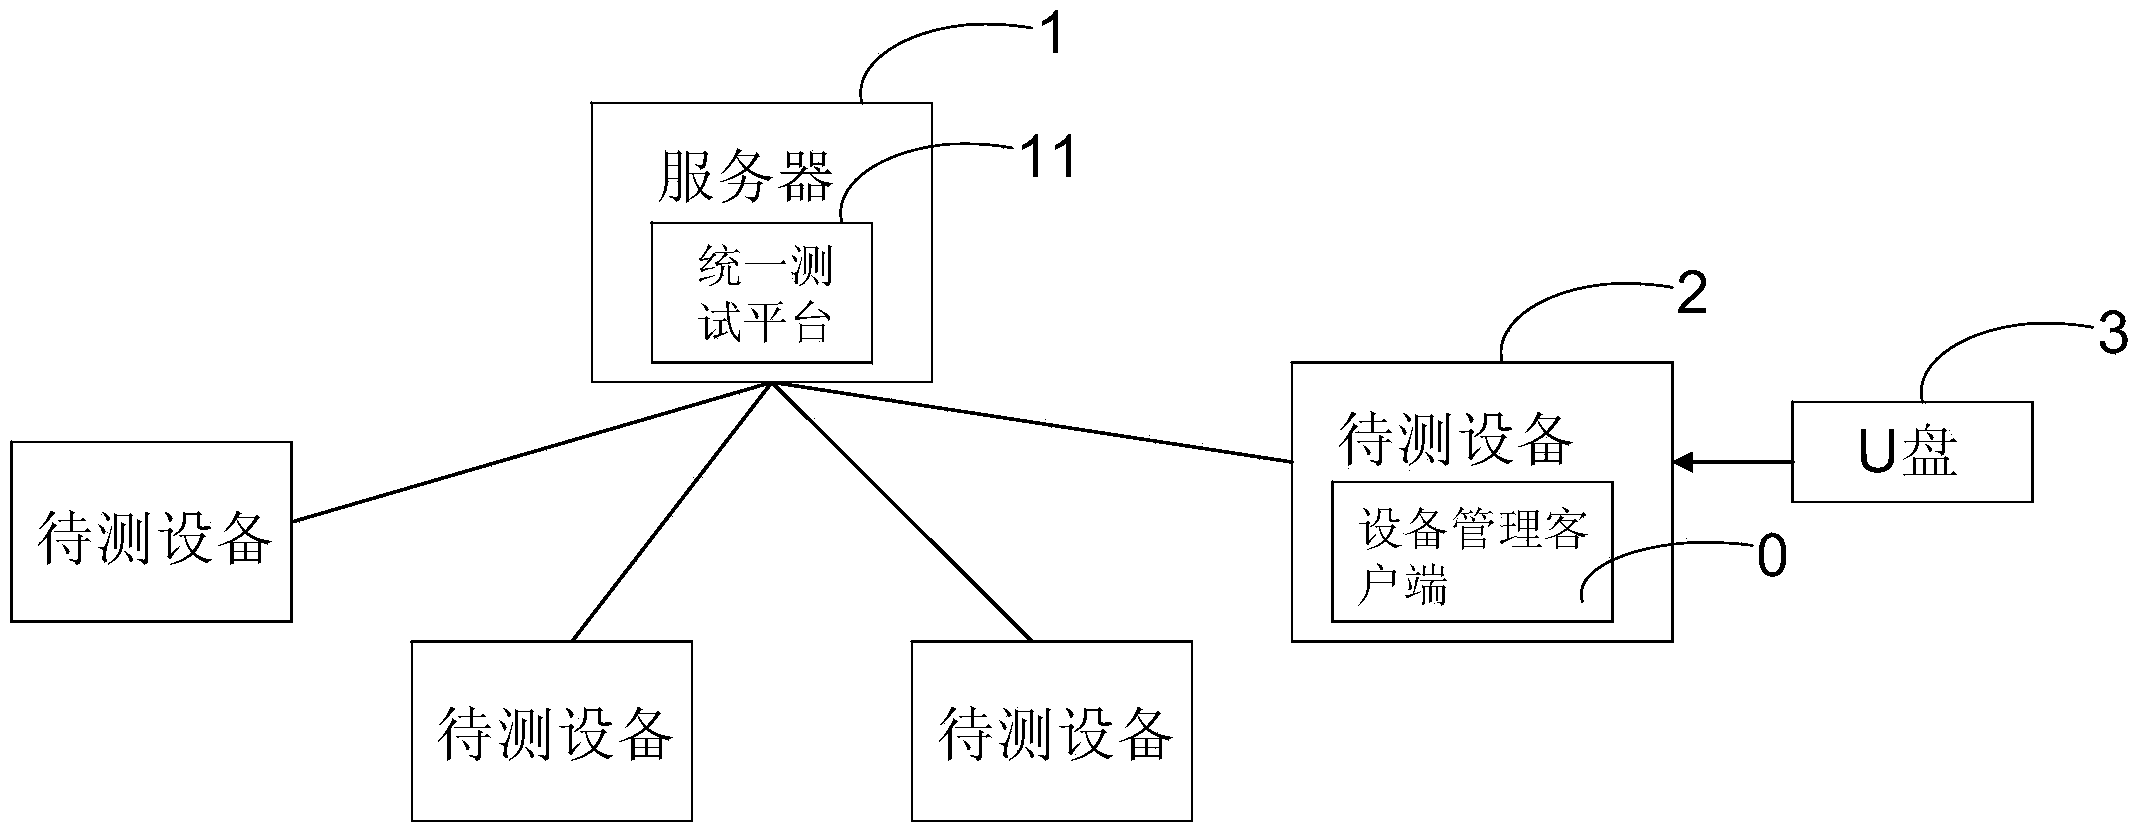 Method and system for testing telecommunication devices